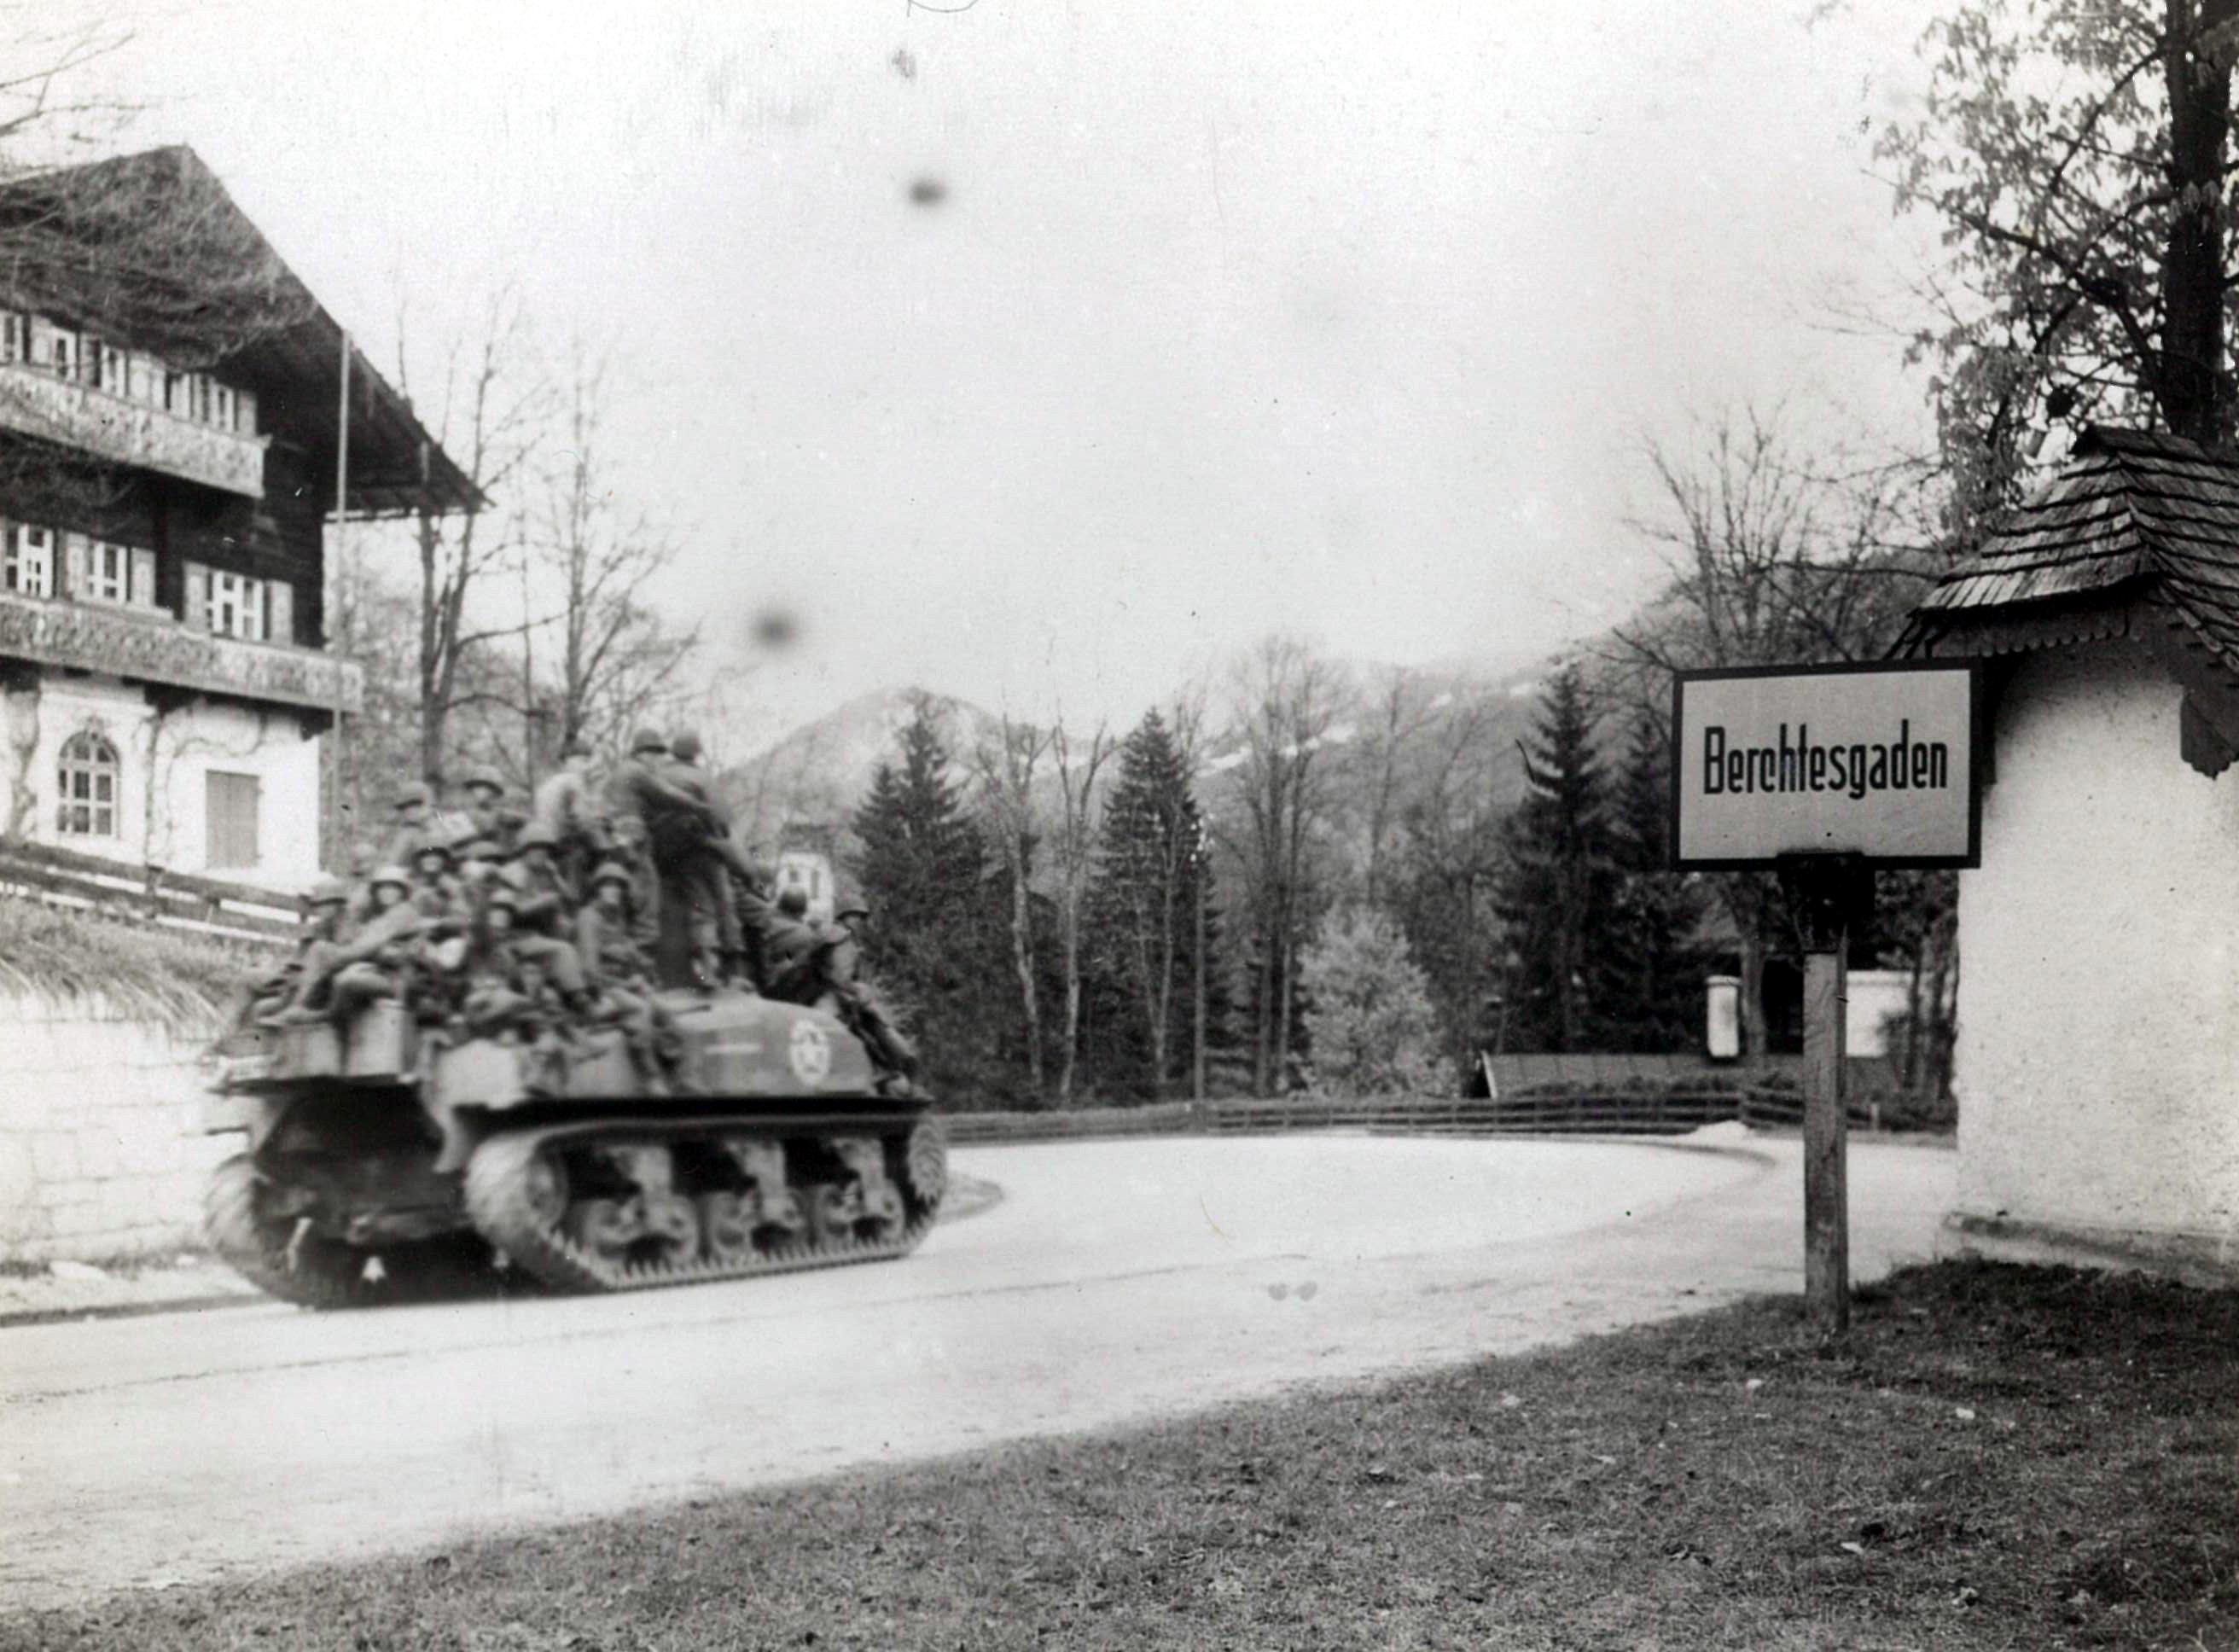 An M4 Sherman tank and men of the 3rd Infantry Division entering Berchtesgaden, Germany, May 4, 1945